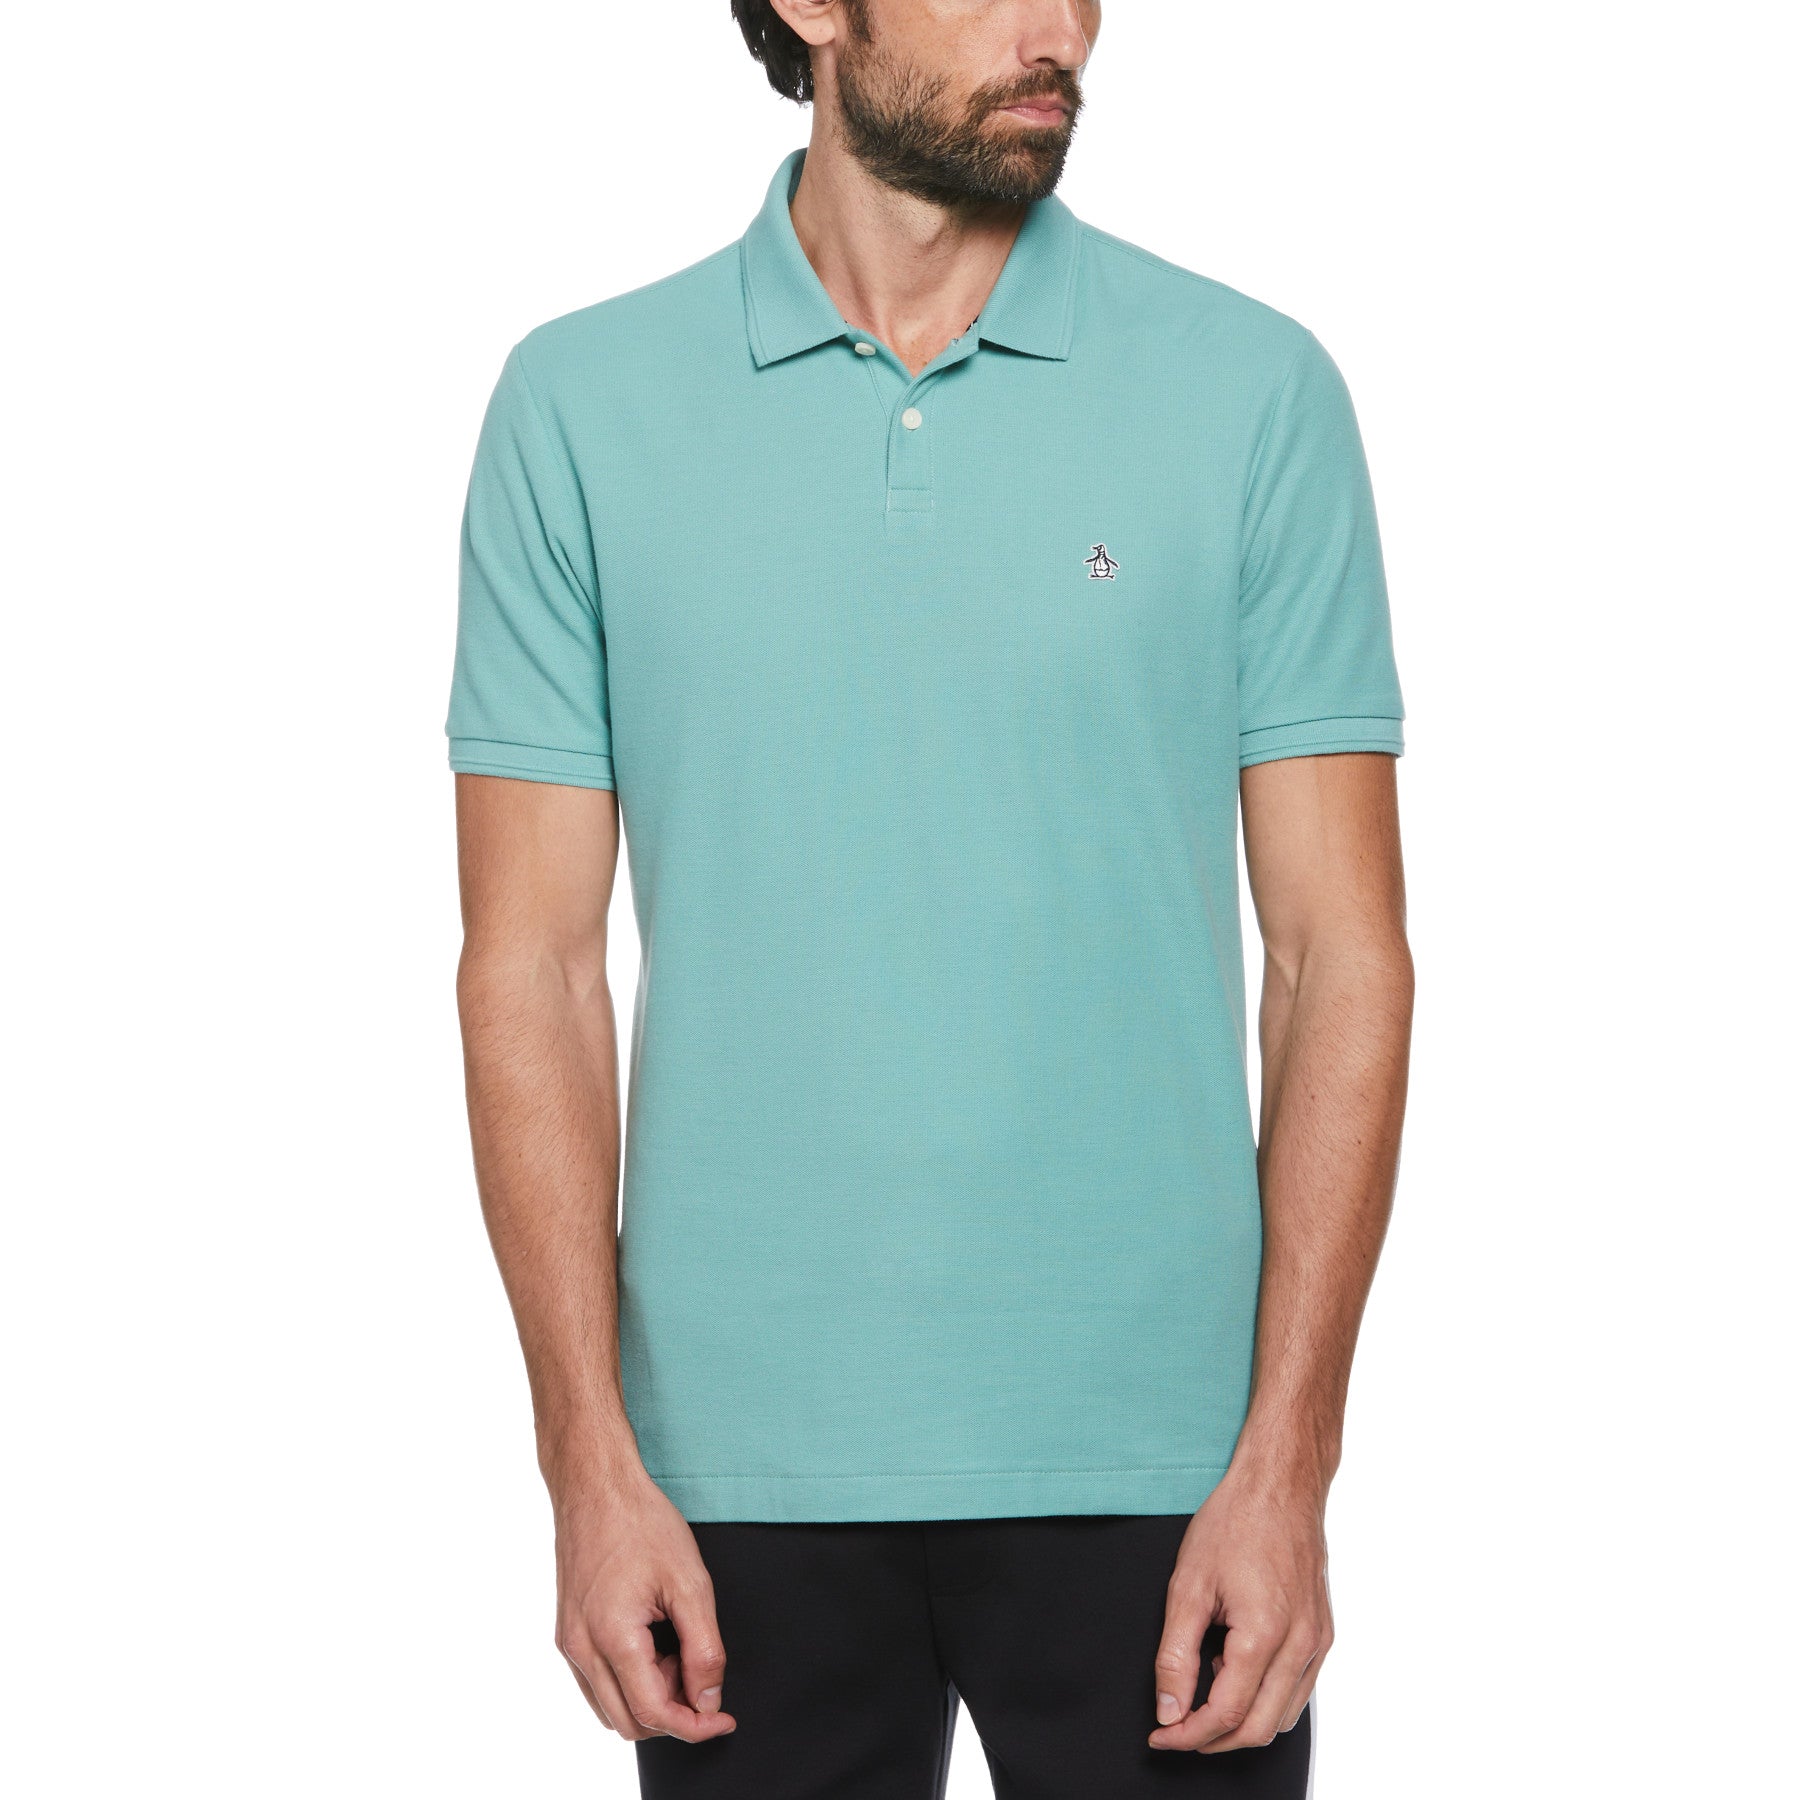 View Sticker Pete Daddy Polo Shirt In Oil Blue information